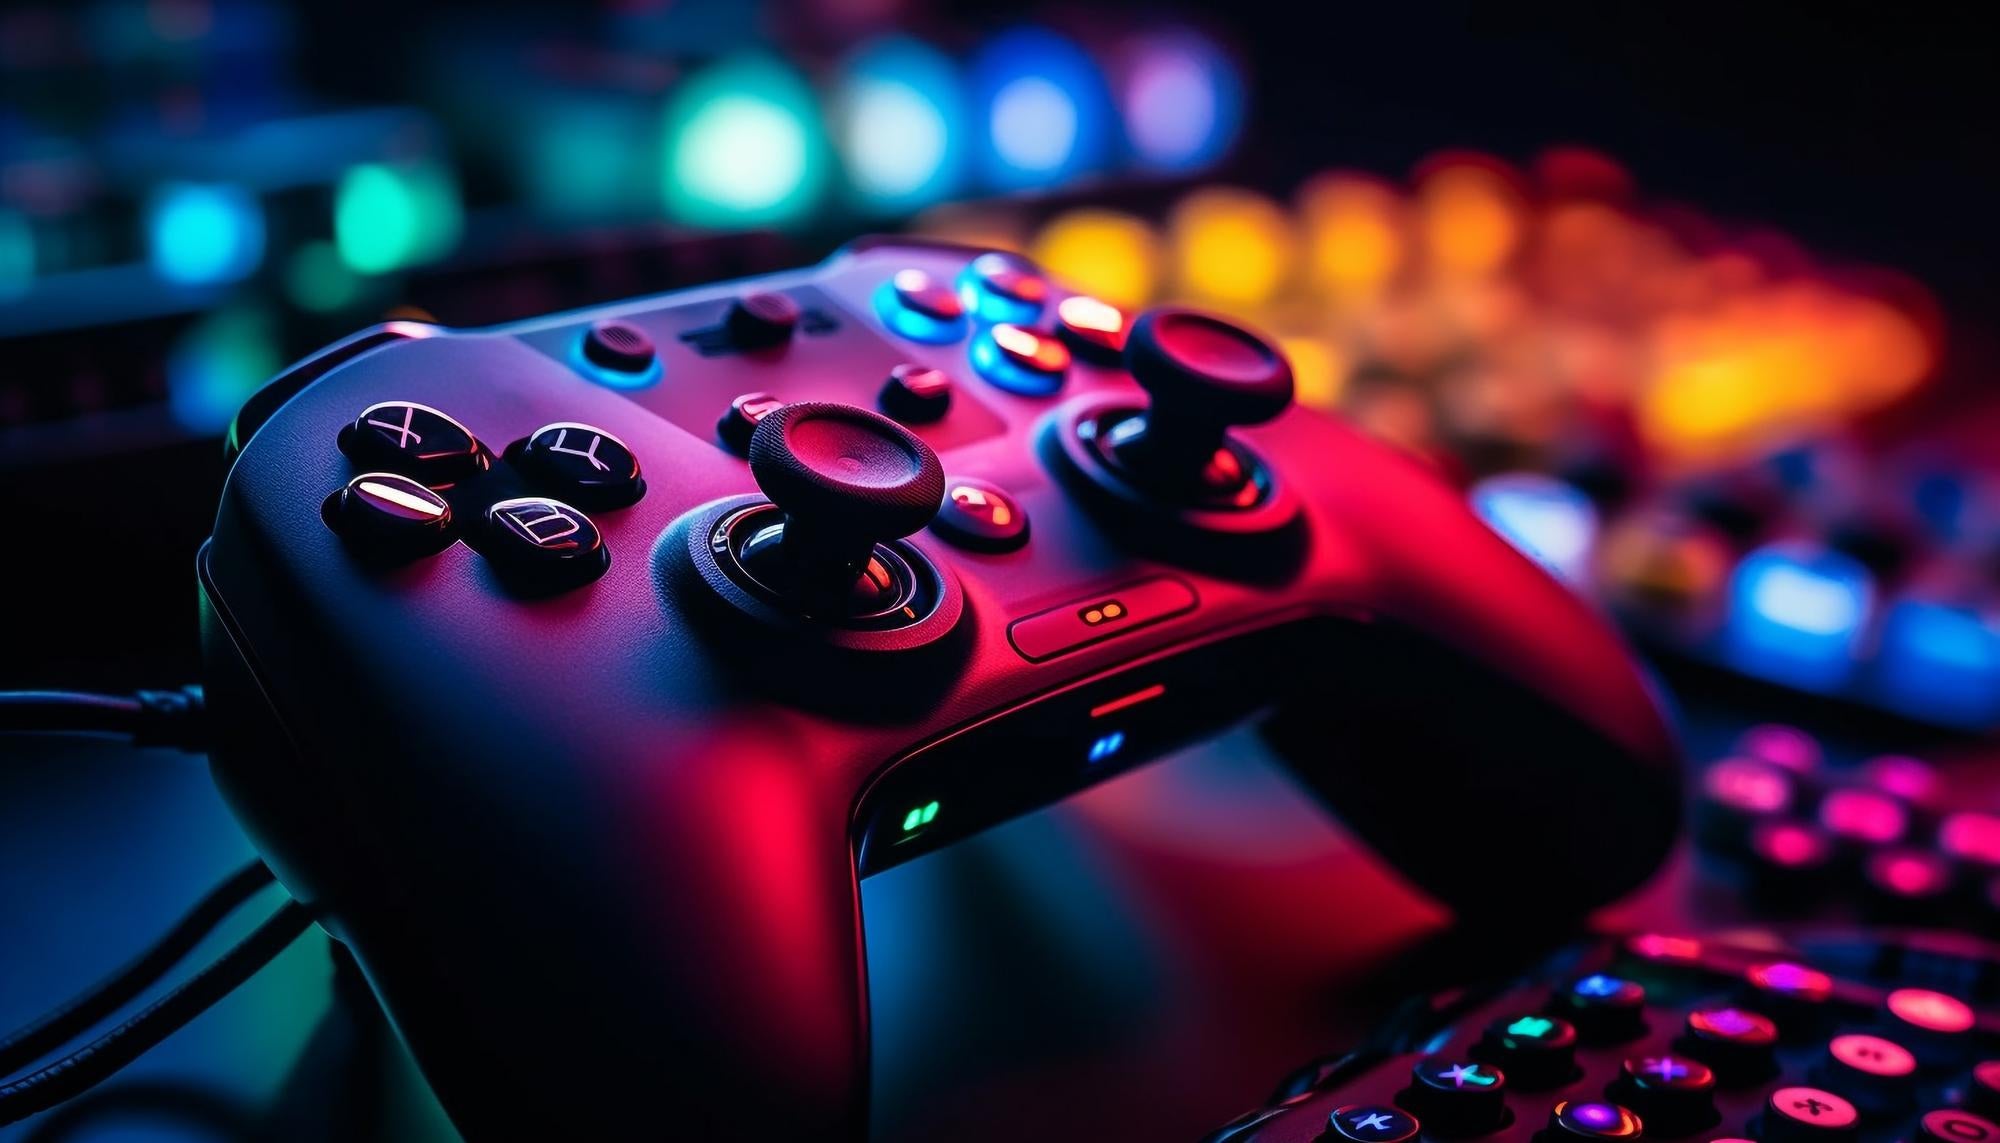 Discover the features that make a controller truly stand out and elevate your gaming sessions.